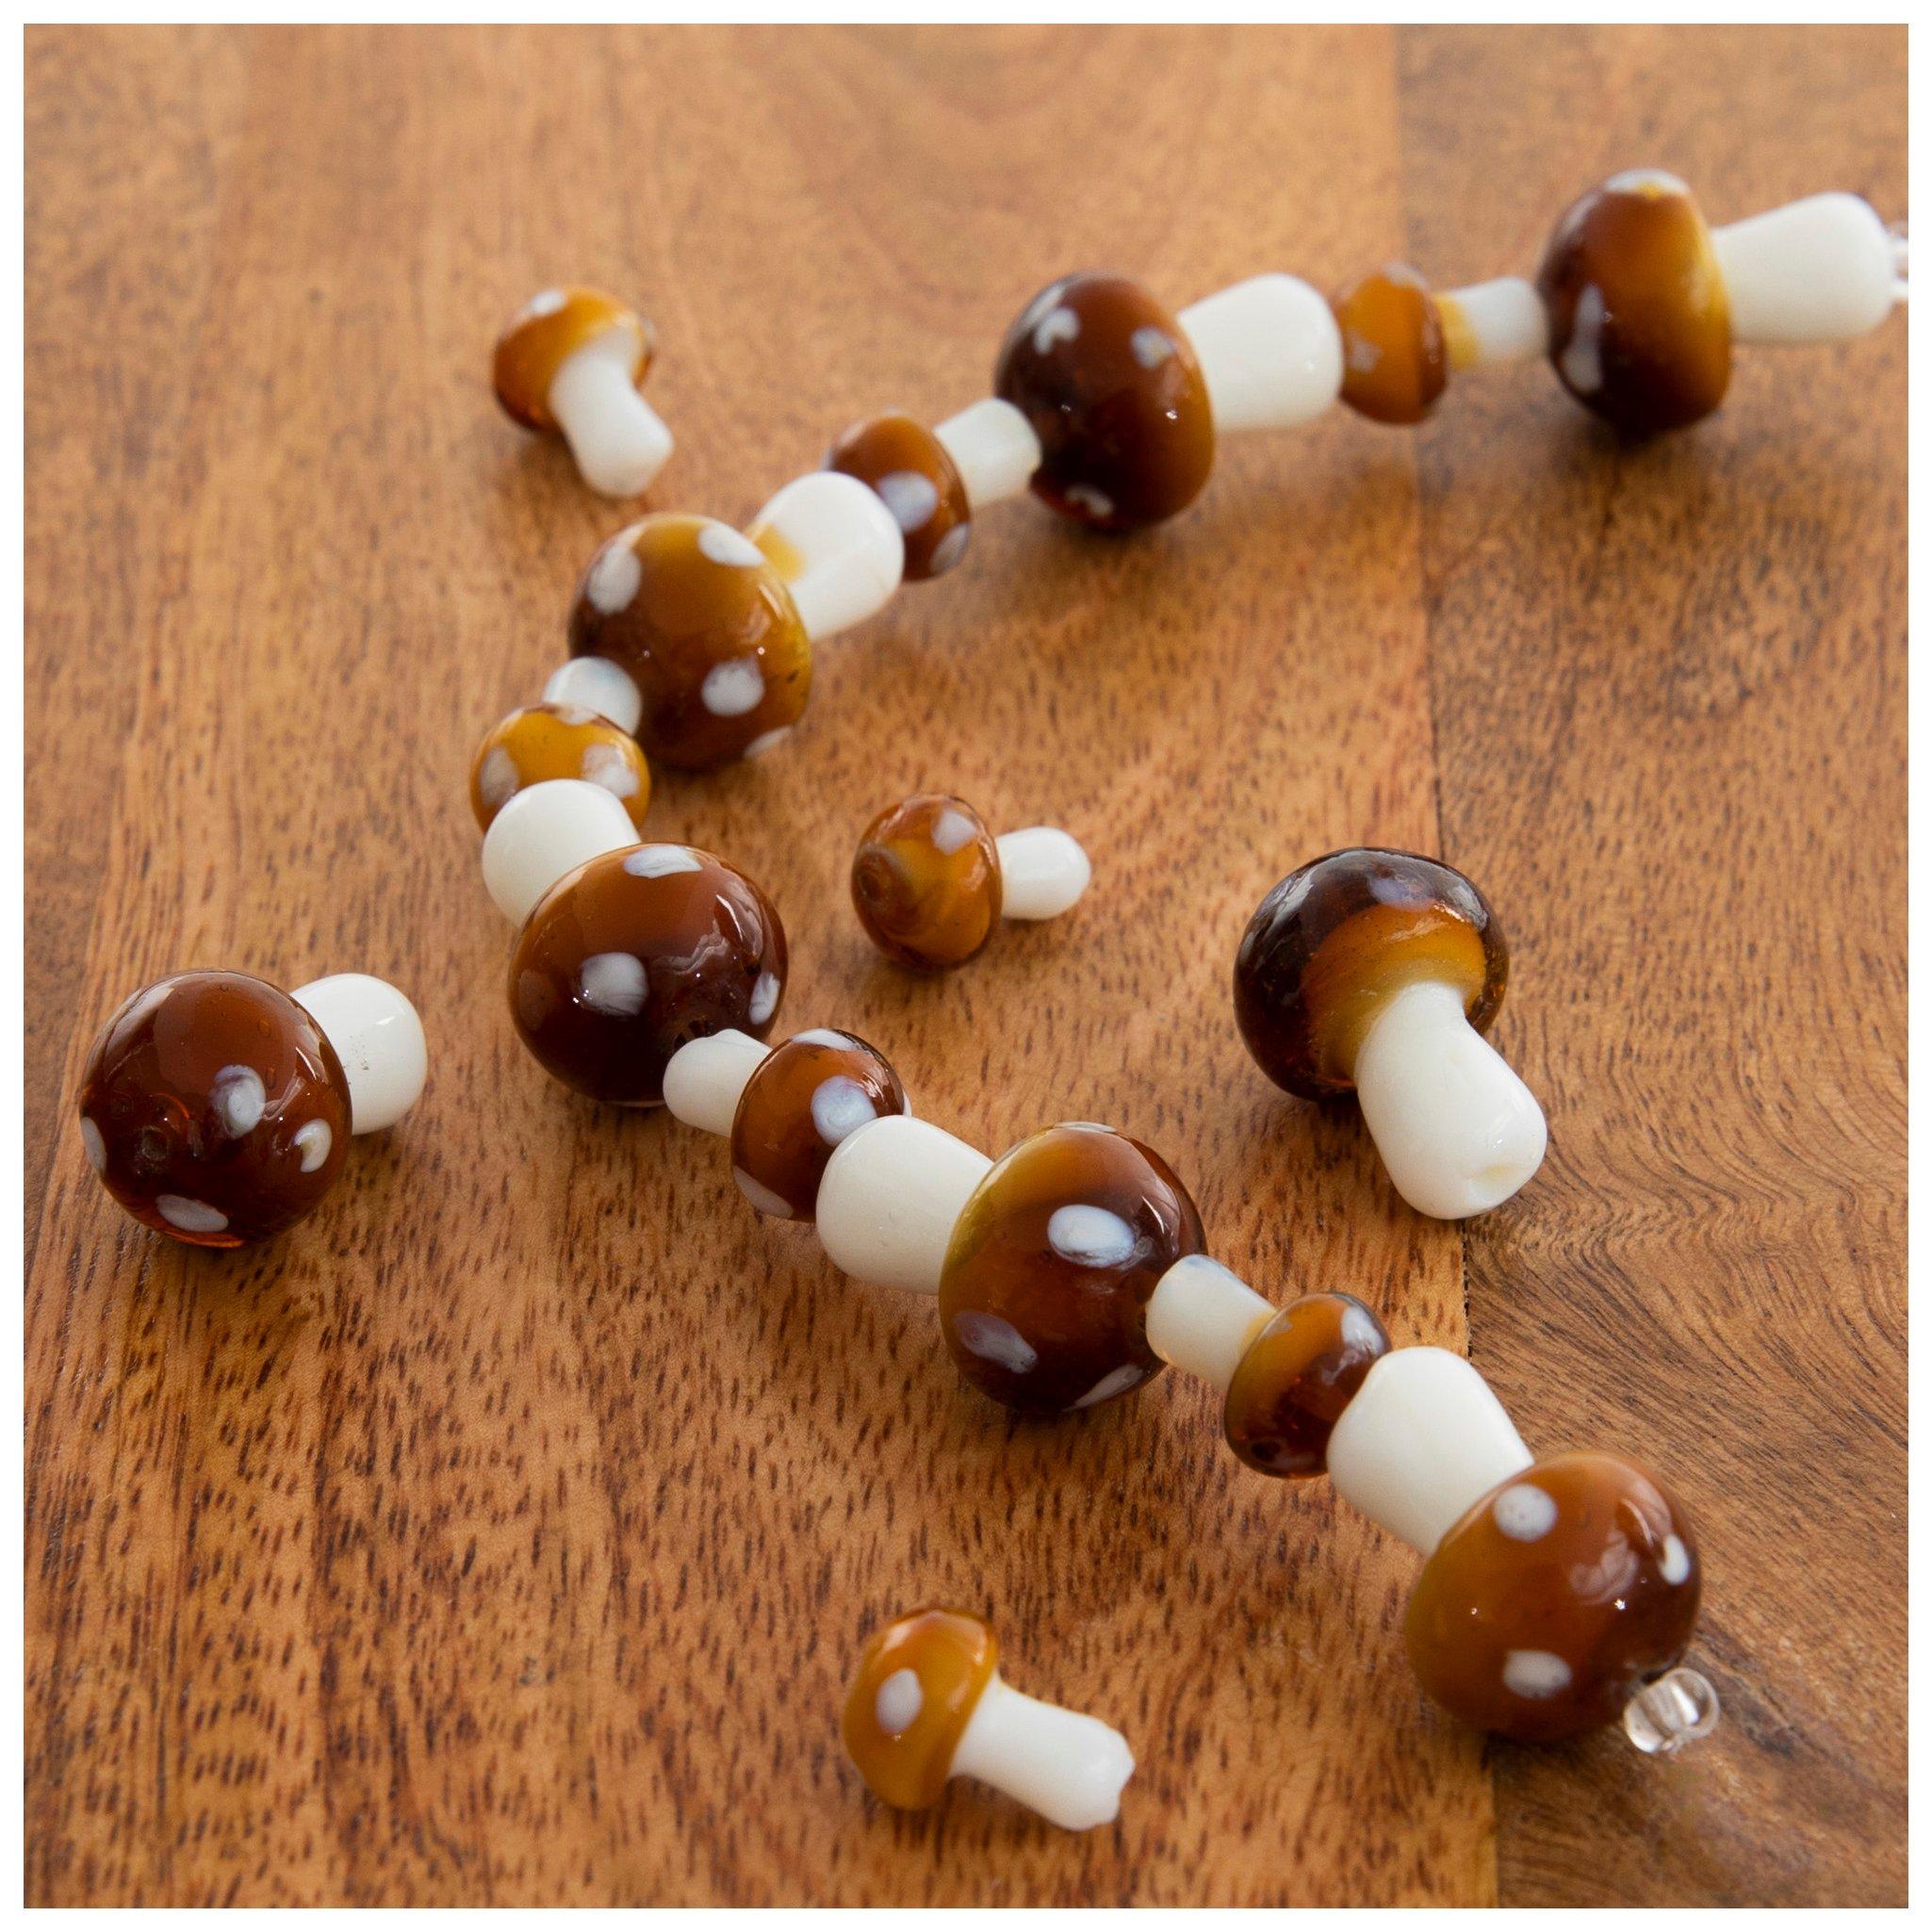 Opaque Mustard Mushroom Beads With Luster Finish, 9x8mm Mushroom Beads,  Mushroom Button Beads, 30 Beads per Strand 